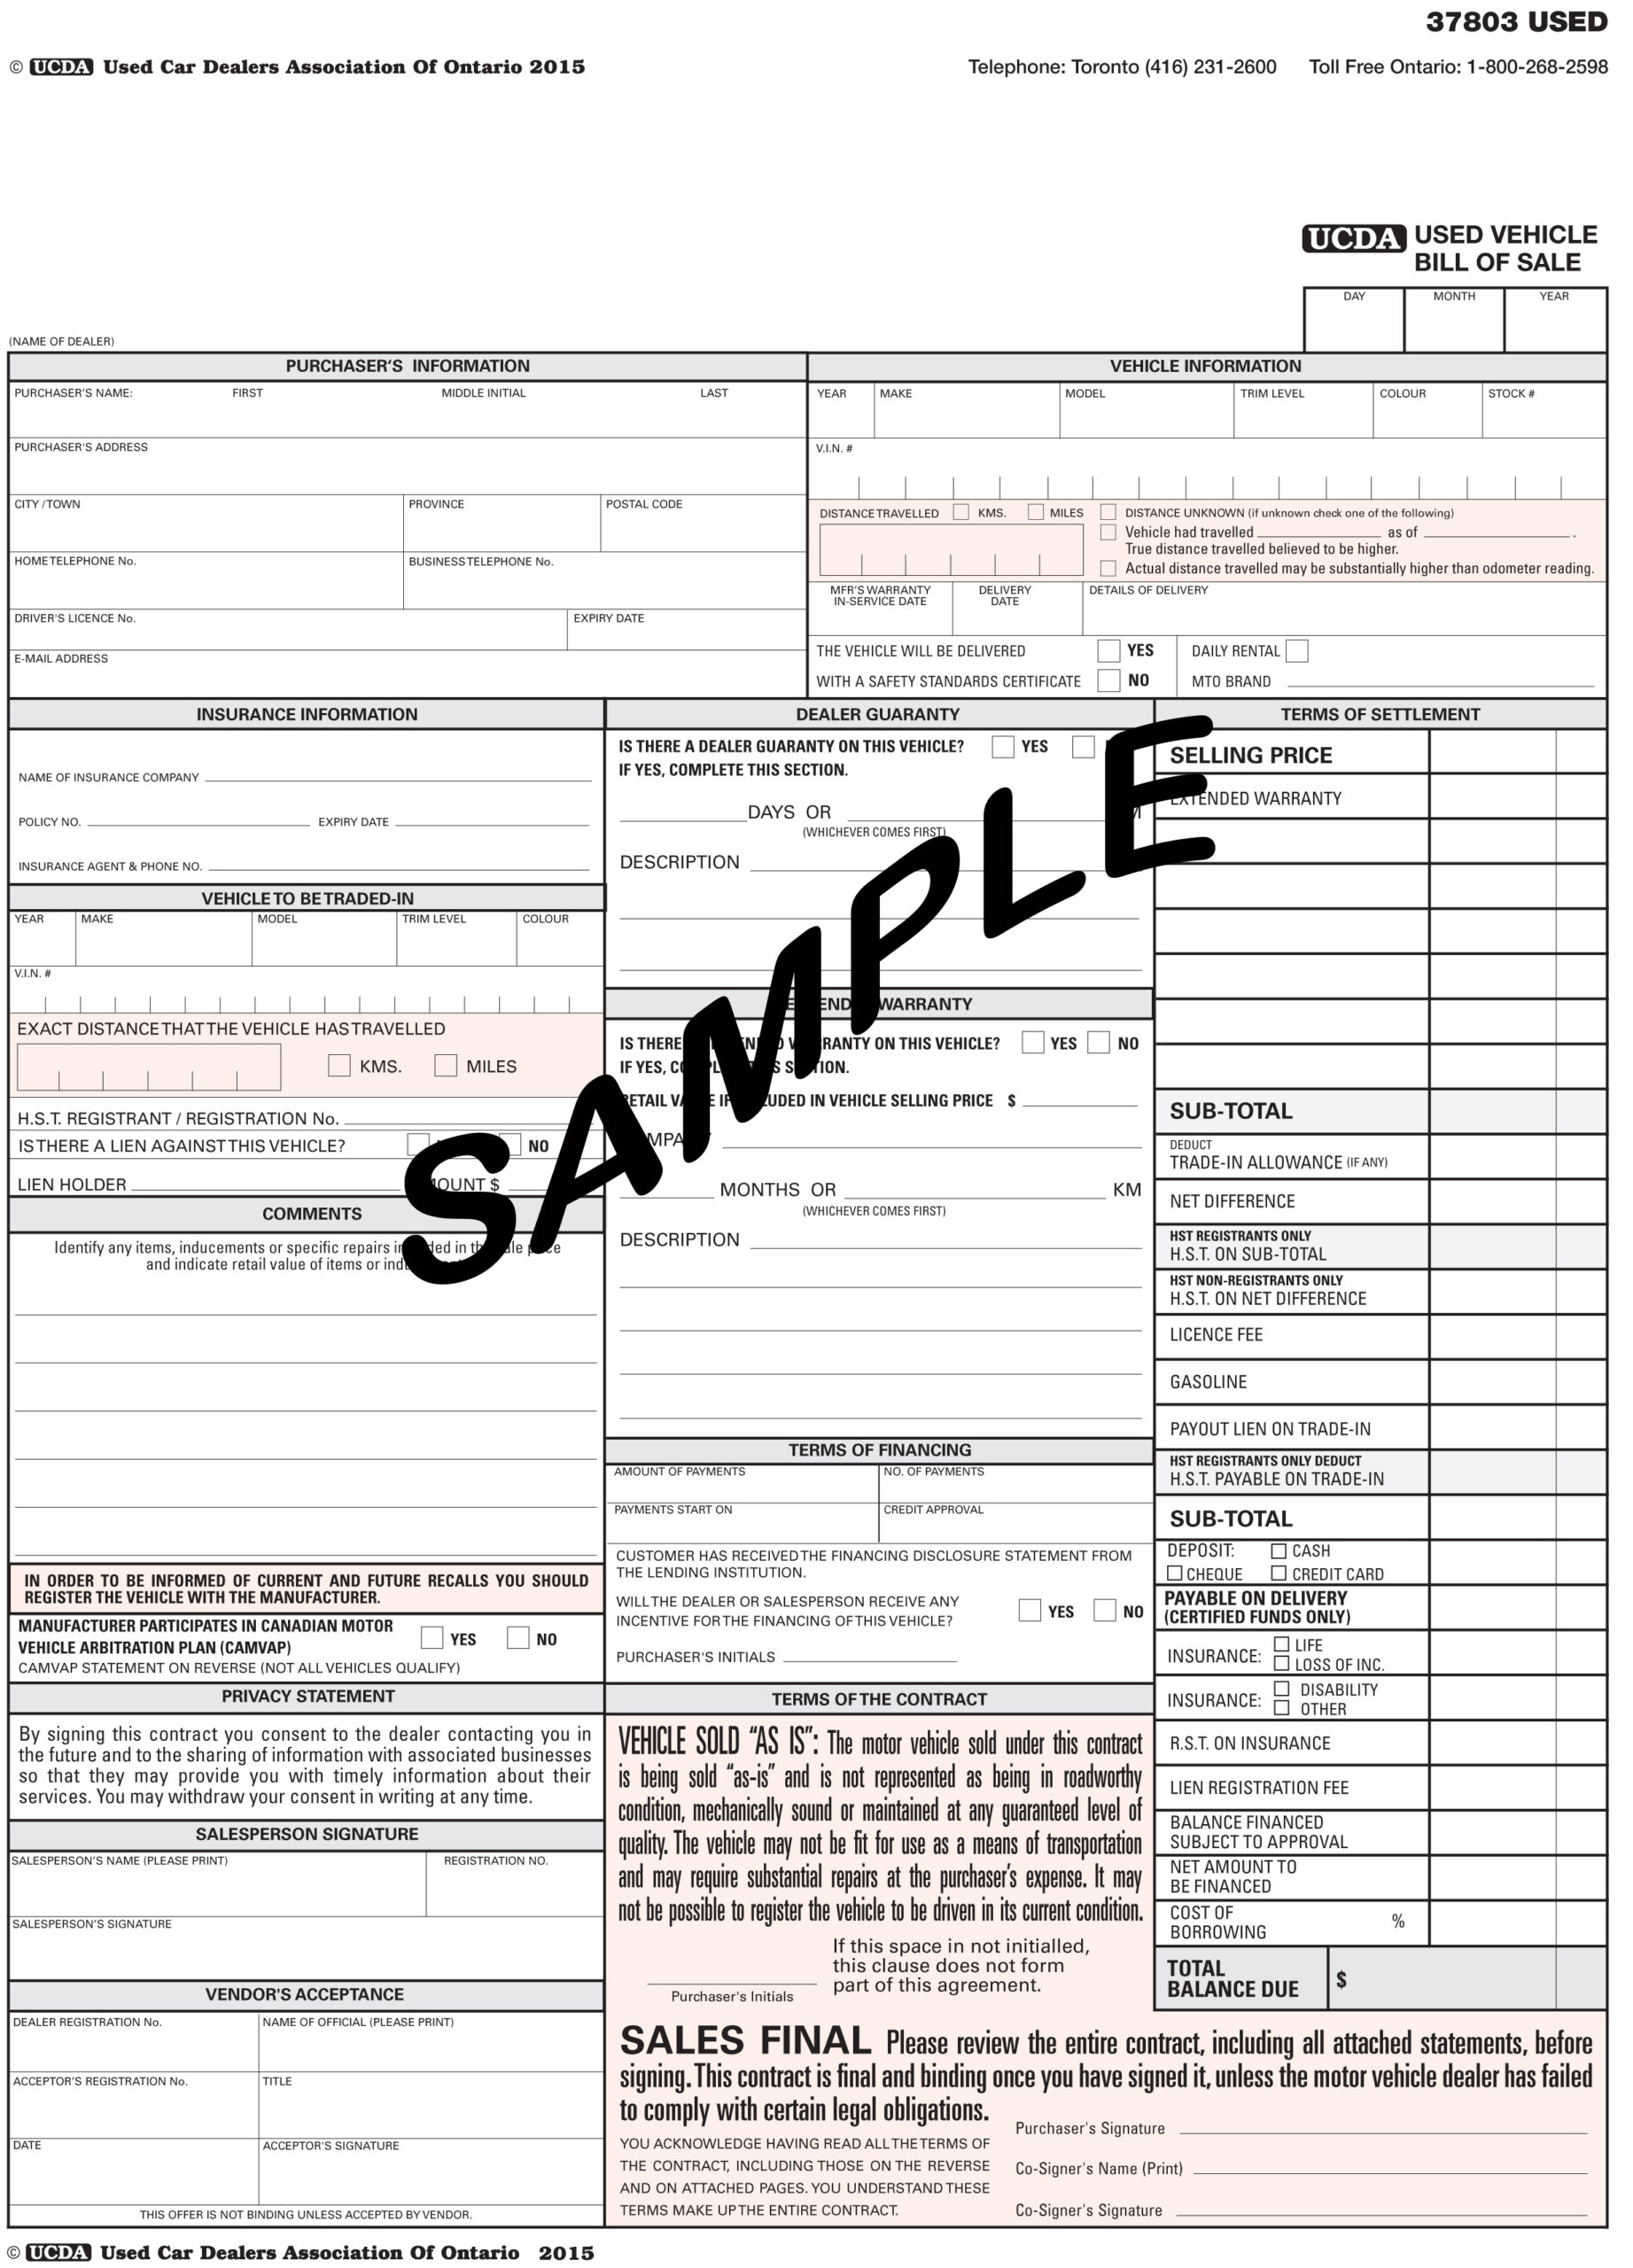 Used Vehicle Bill Of Sale - The Used Car Dealers Association Of - Free Printable Bill Of Sale Ontario